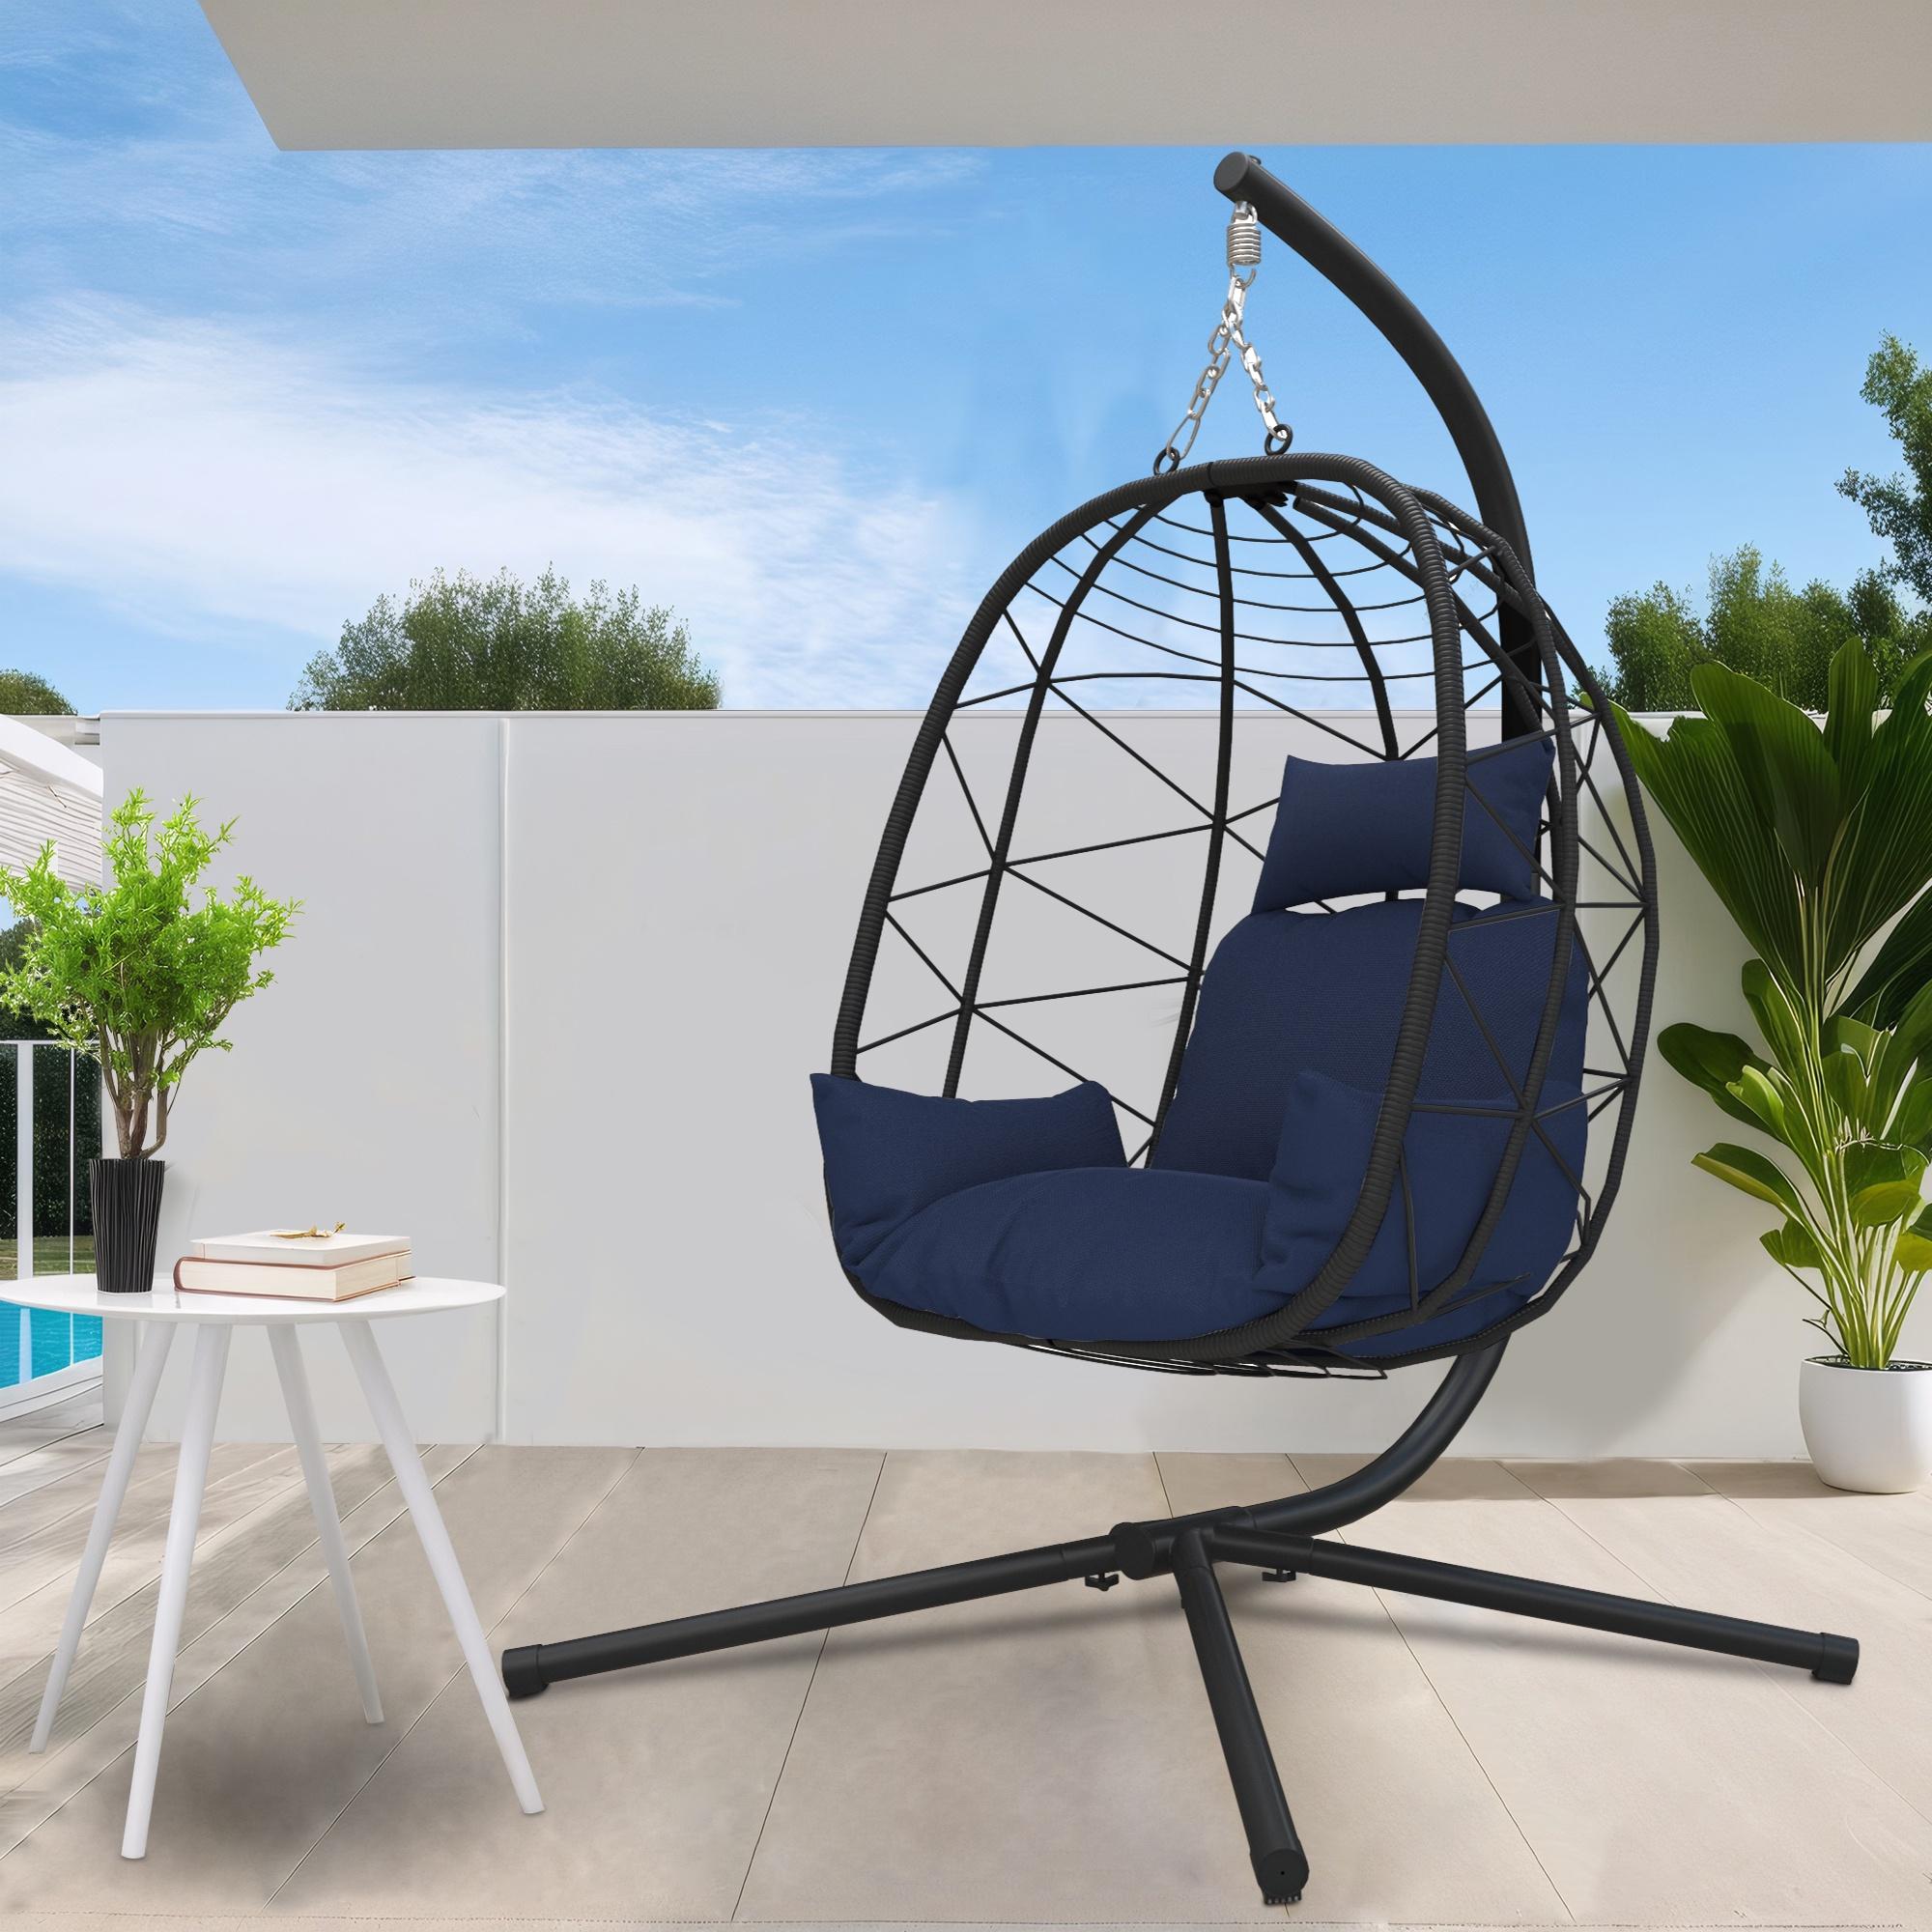 Egg Chair with Stand, Patio Wicker Hanging Chair, Egg Chair Hammock Chair with UV Resistant Cushion and Pillow for Indoor Outdoor, Patio Backyard Balcony Lounge Rattan Swing Chair, JA2832 - image 1 of 9